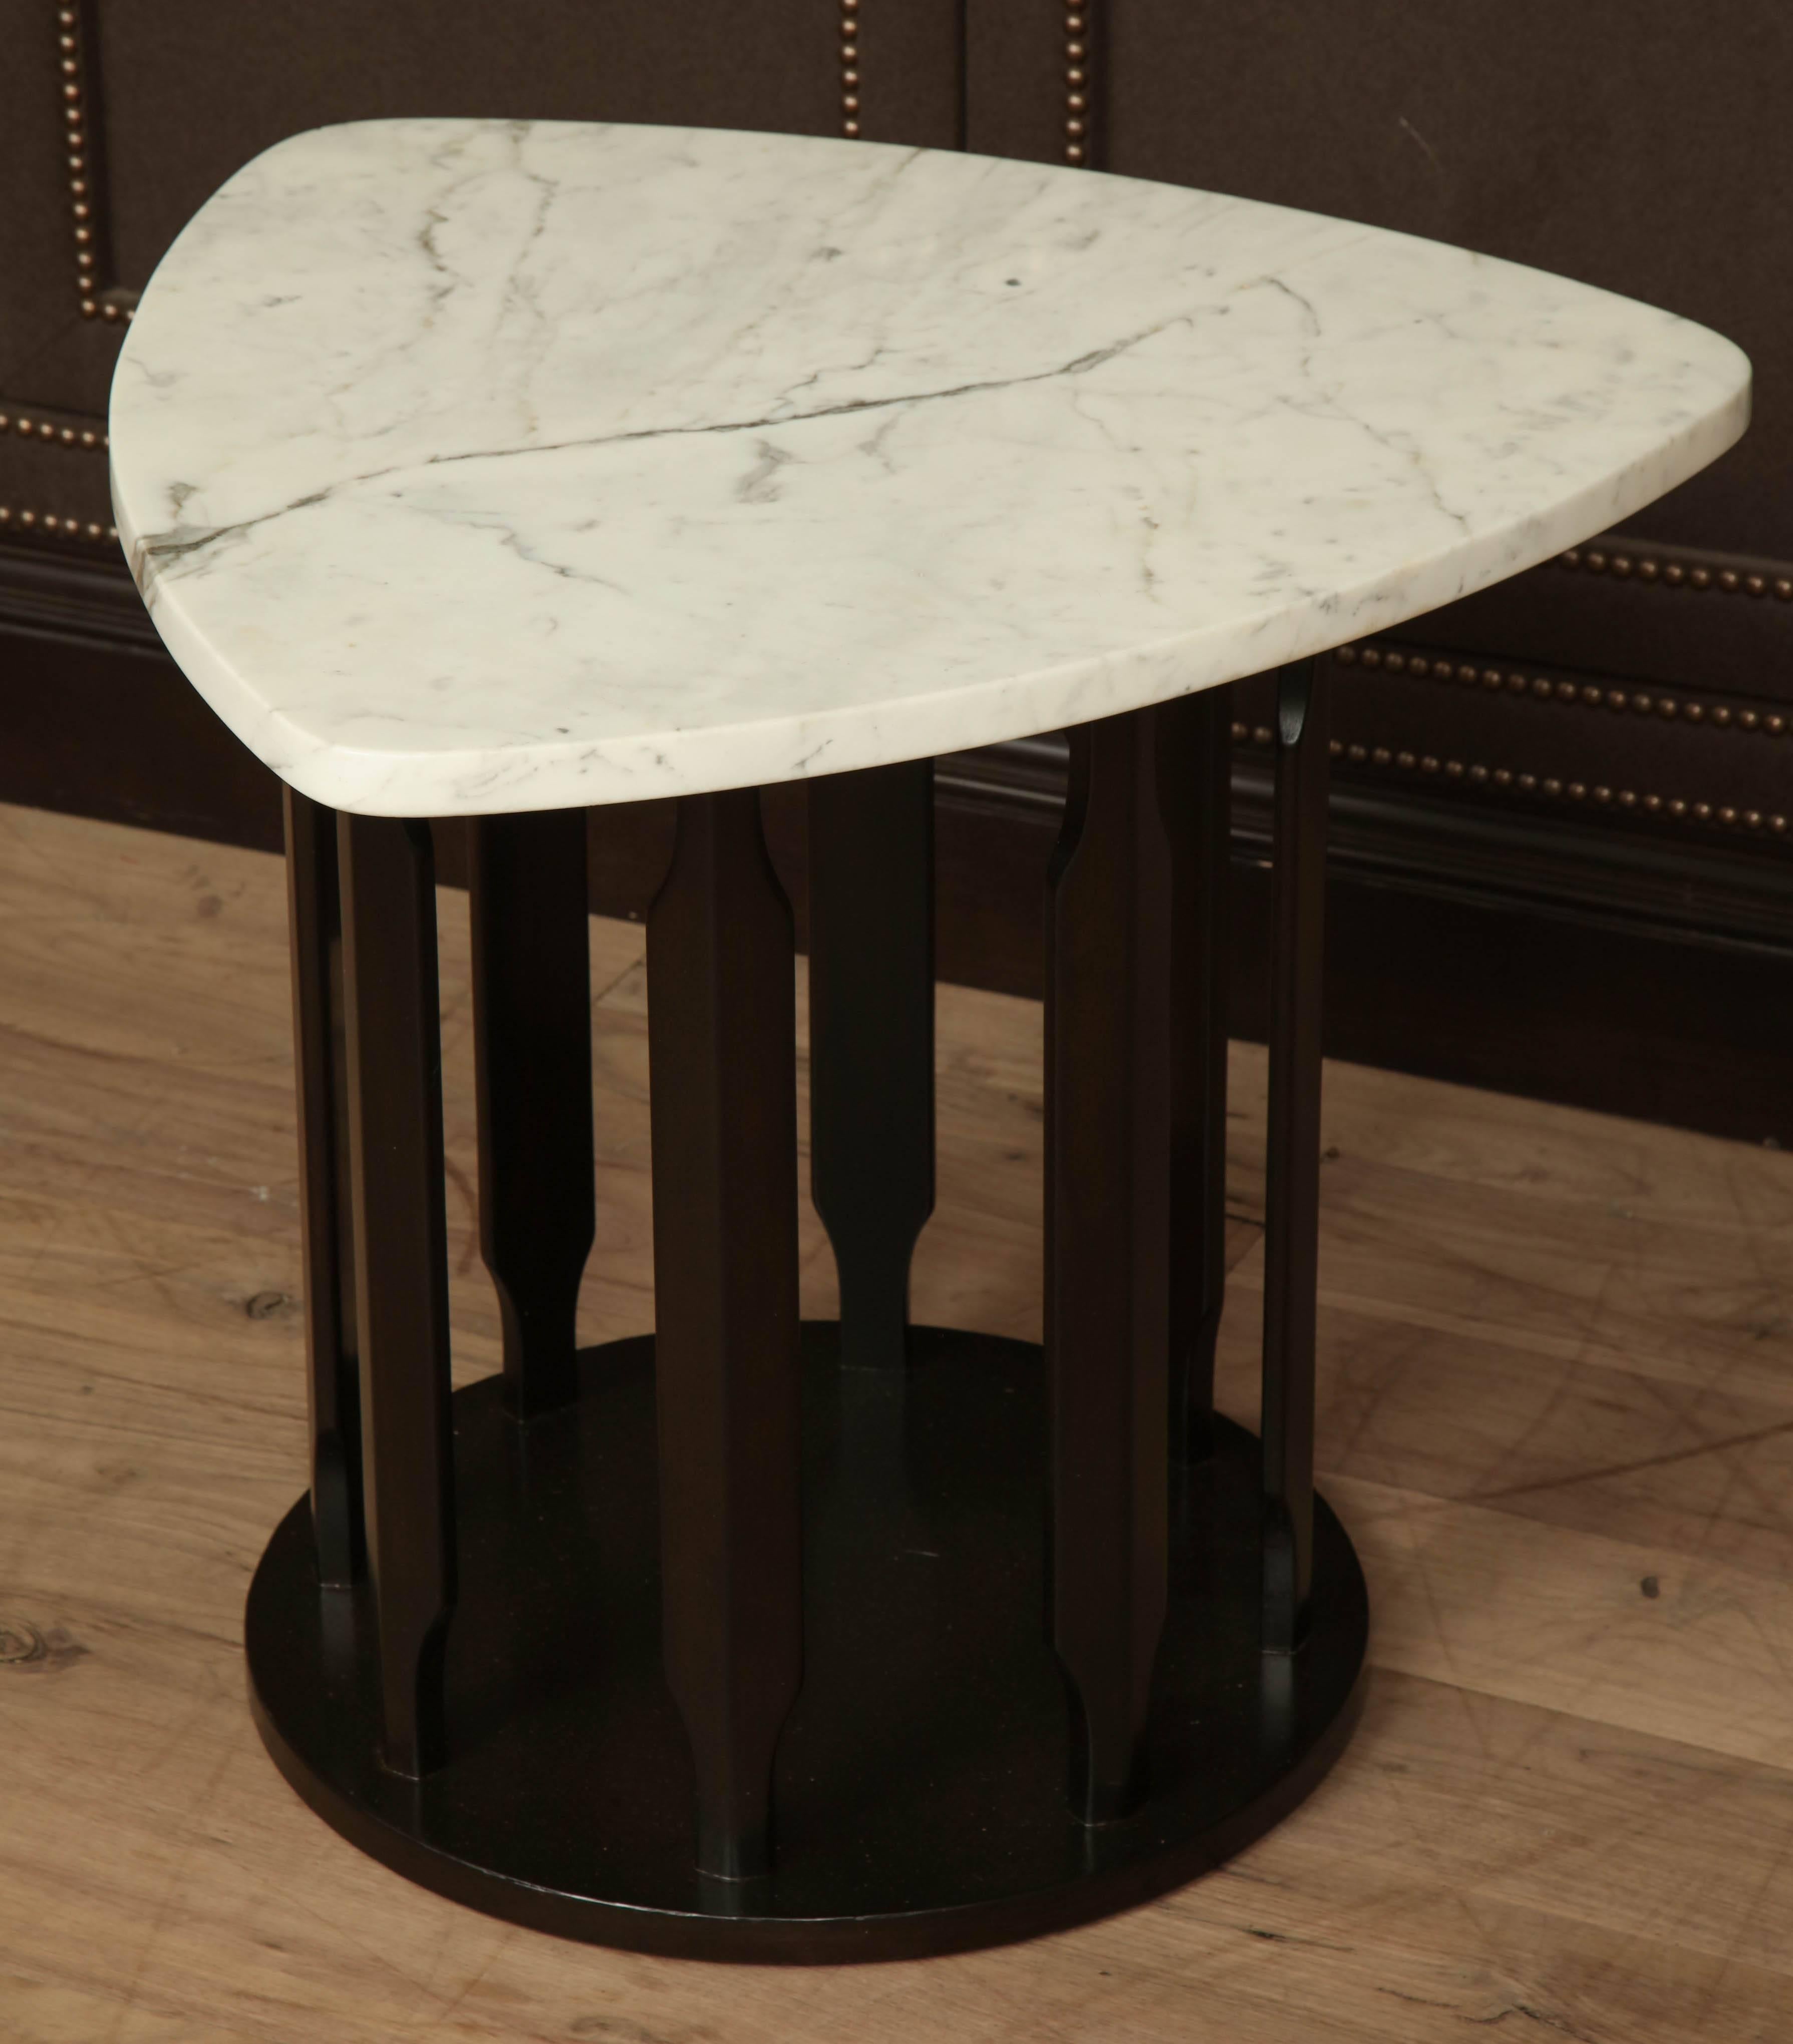 Dark sable finished side table with triangular marble top, circa 1950.